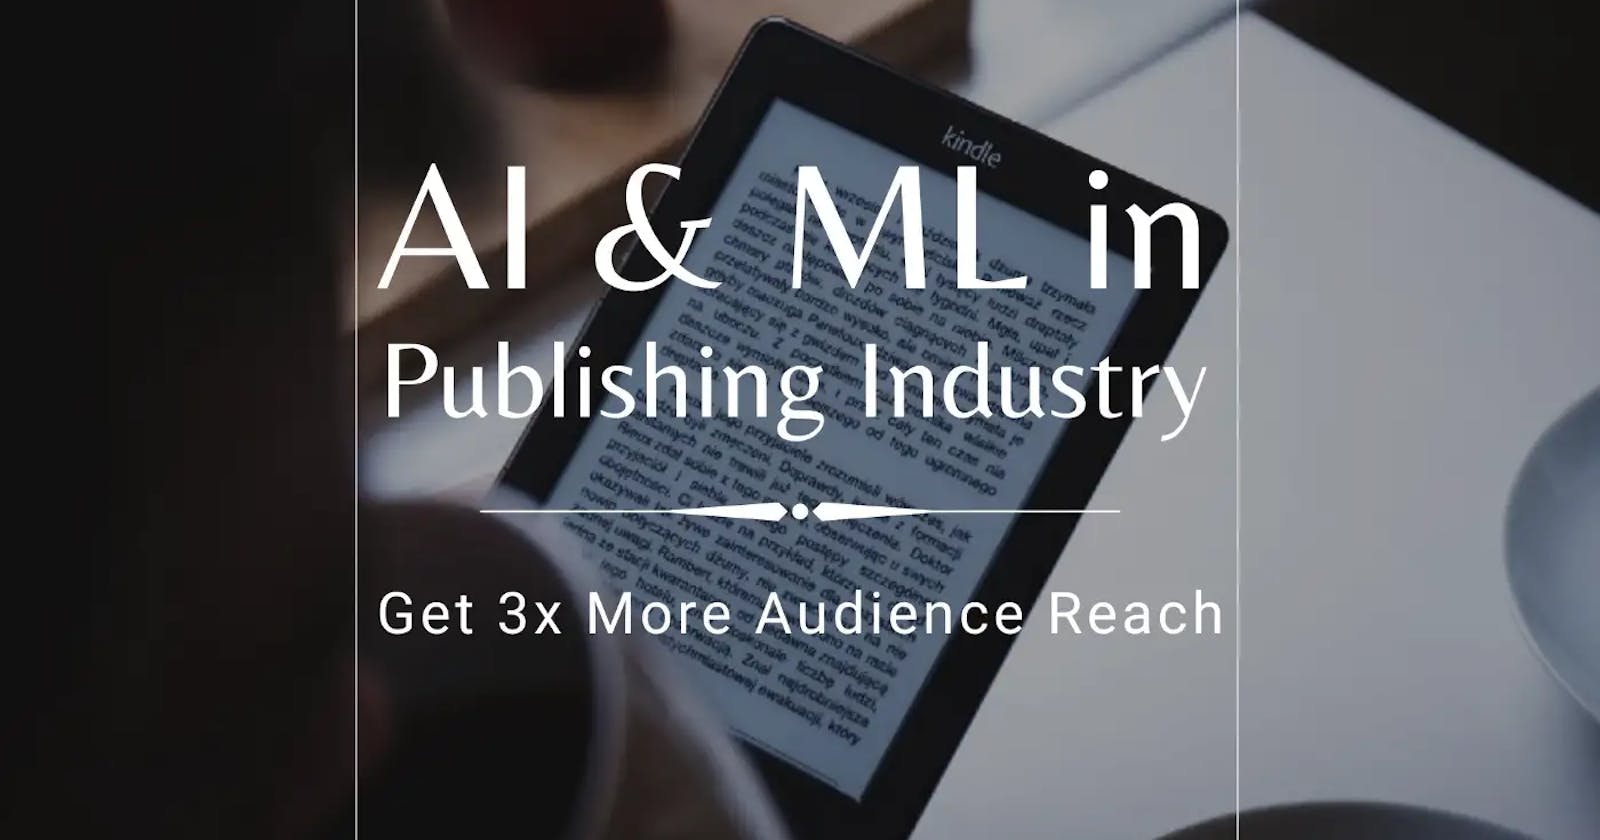 Gain 3X Extra Audience Reach Using AI & ML in the Publishing Industry 📚